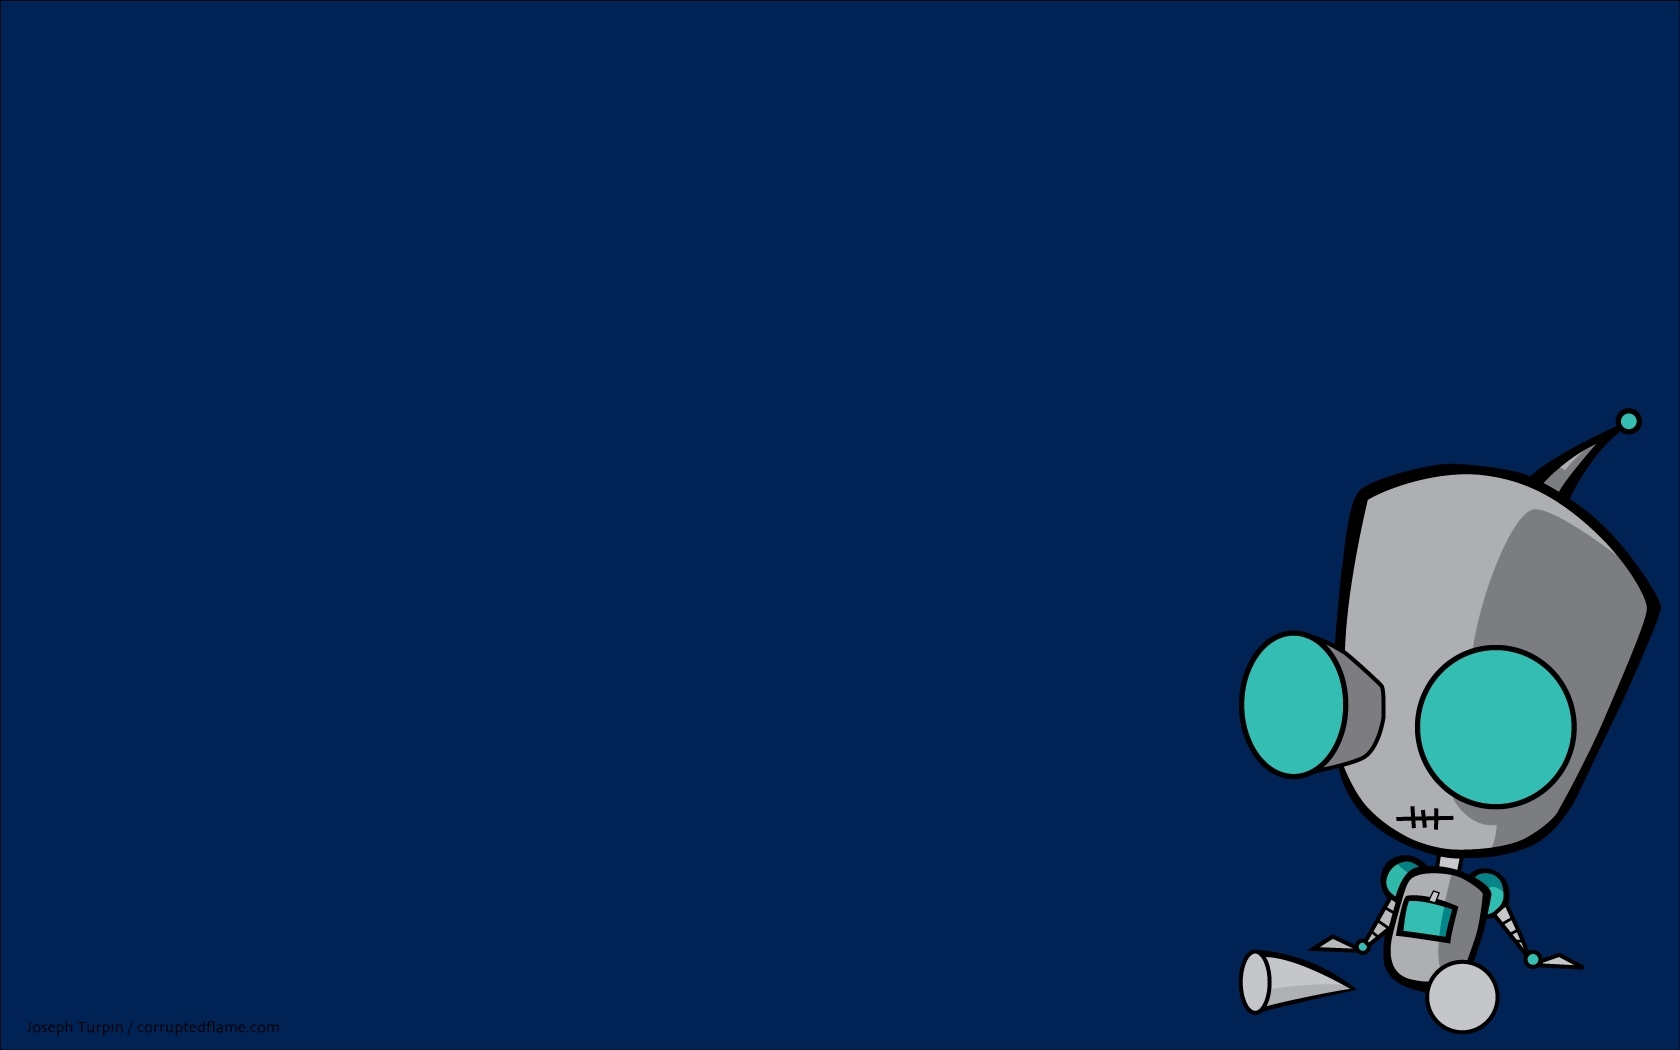 Invader Zim images GIR HD wallpaper and background photos